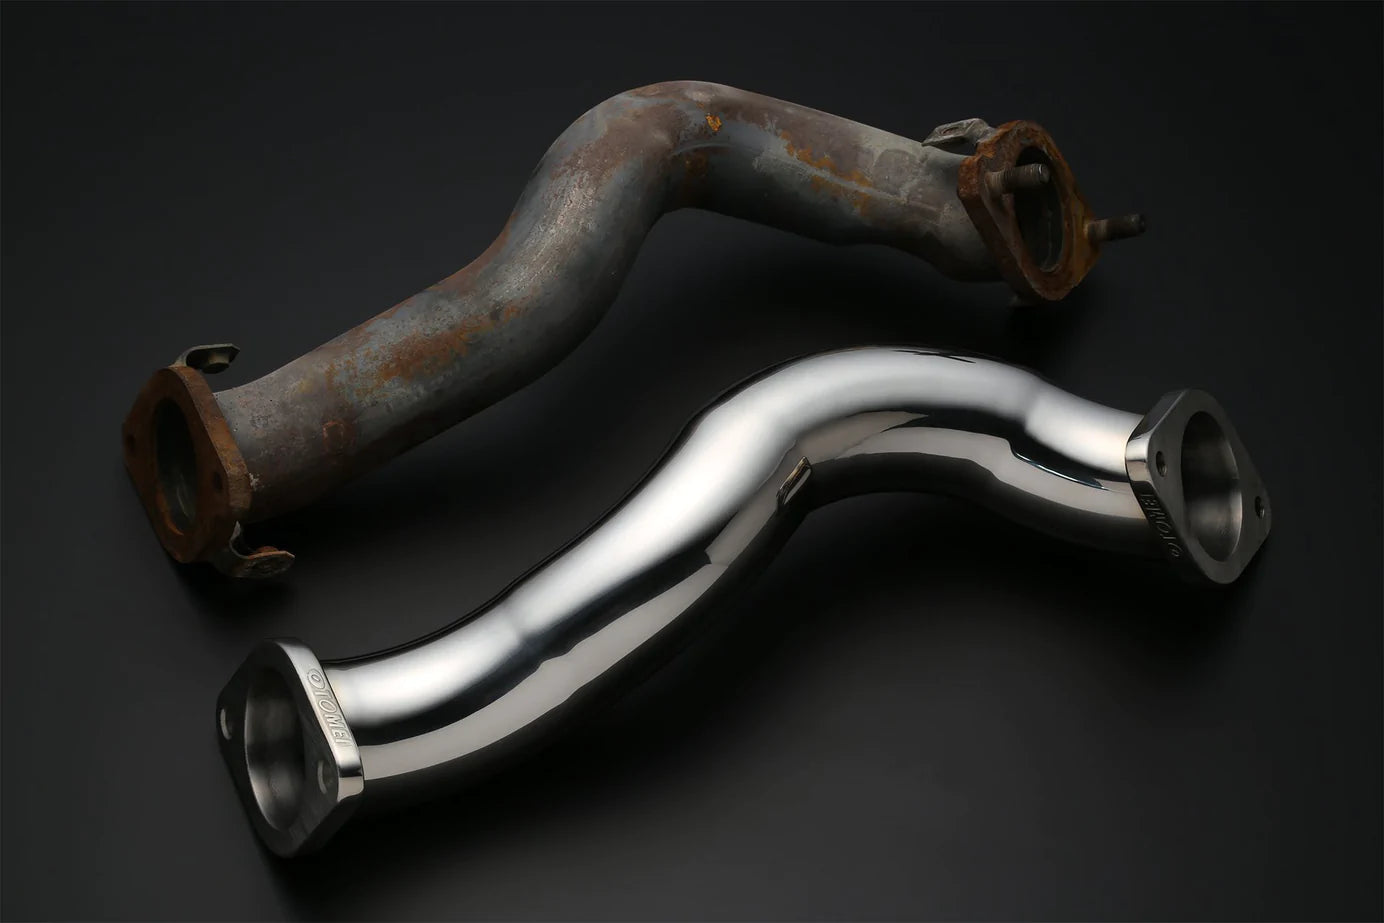 Tomei EXPREME Joint Pipe with Titan Exhaust Bandage | 2013-2021 Subaru BRZ/Scion FR-S/Toyota 86 and 2022 Subaru BRZ/Toyota GR86